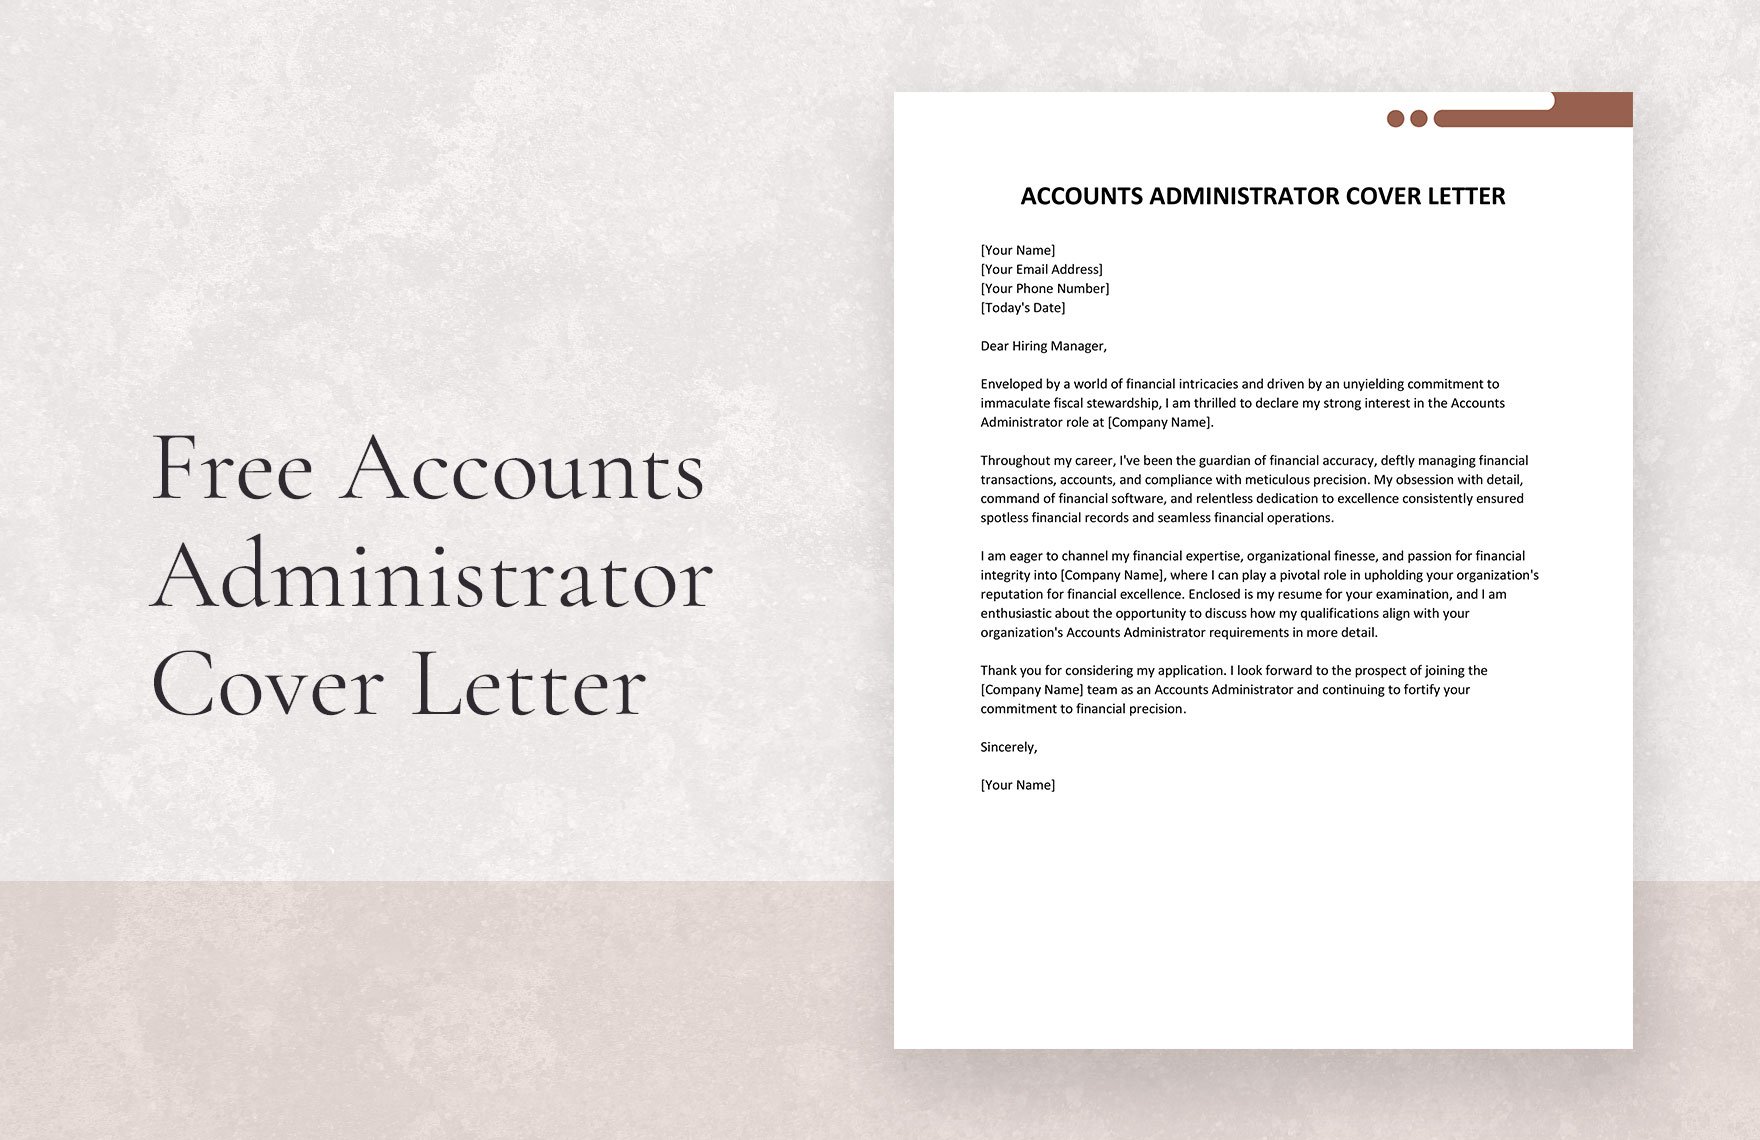 Accounts Administrator Cover Letter